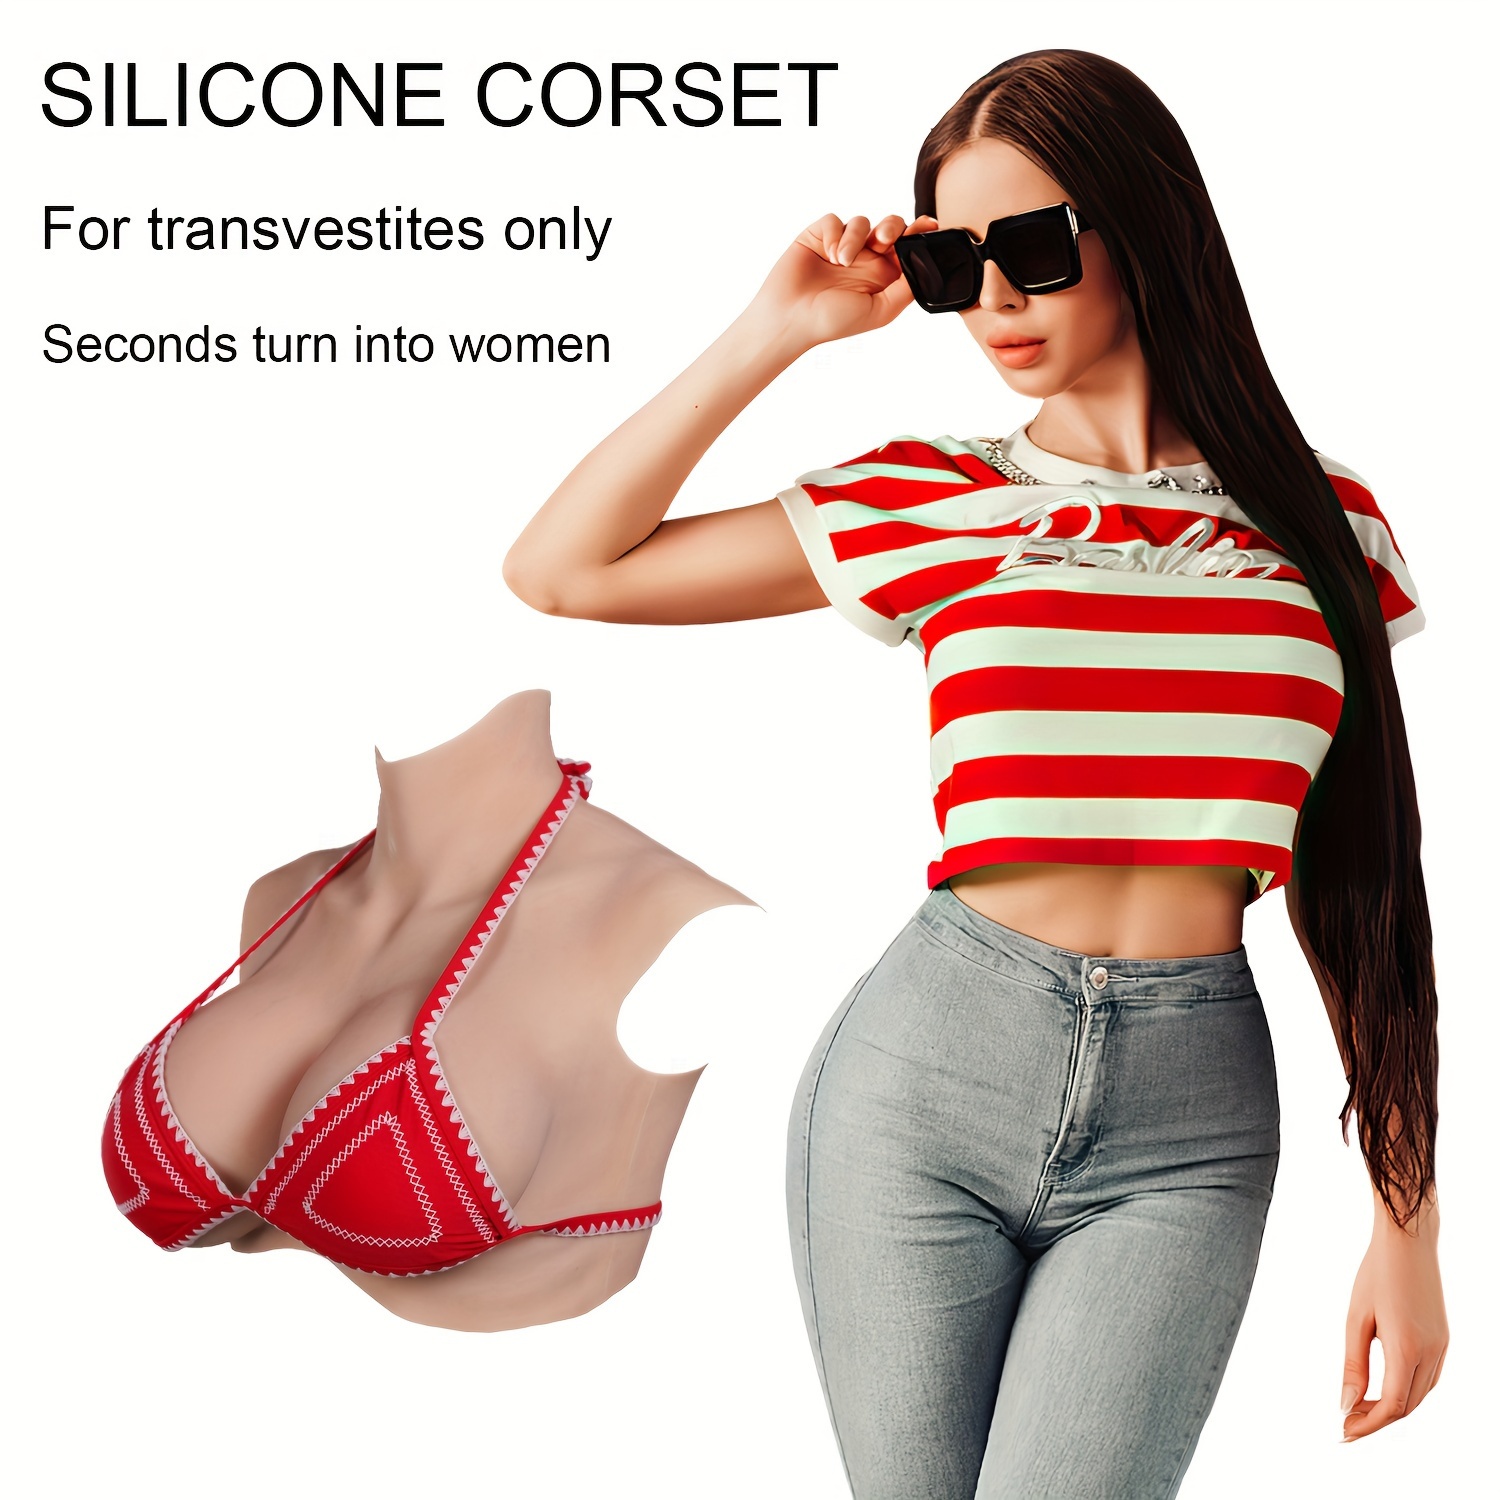  Plus Size Workout Clothes for Women Sexy Female Cop Breast  Feeding Items Maternity Shirt 12 Buckle My Shoe Bra Halter Black :  Clothing, Shoes & Jewelry